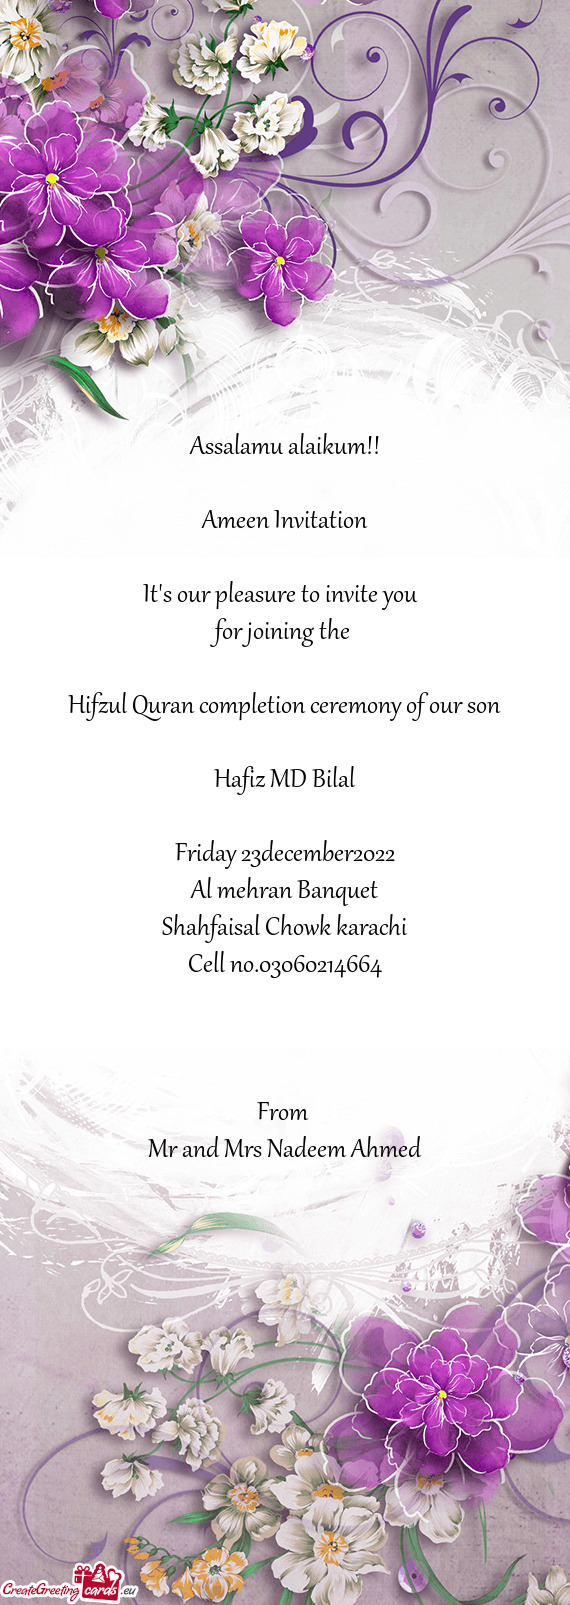 Hifzul Quran completion ceremony of our son